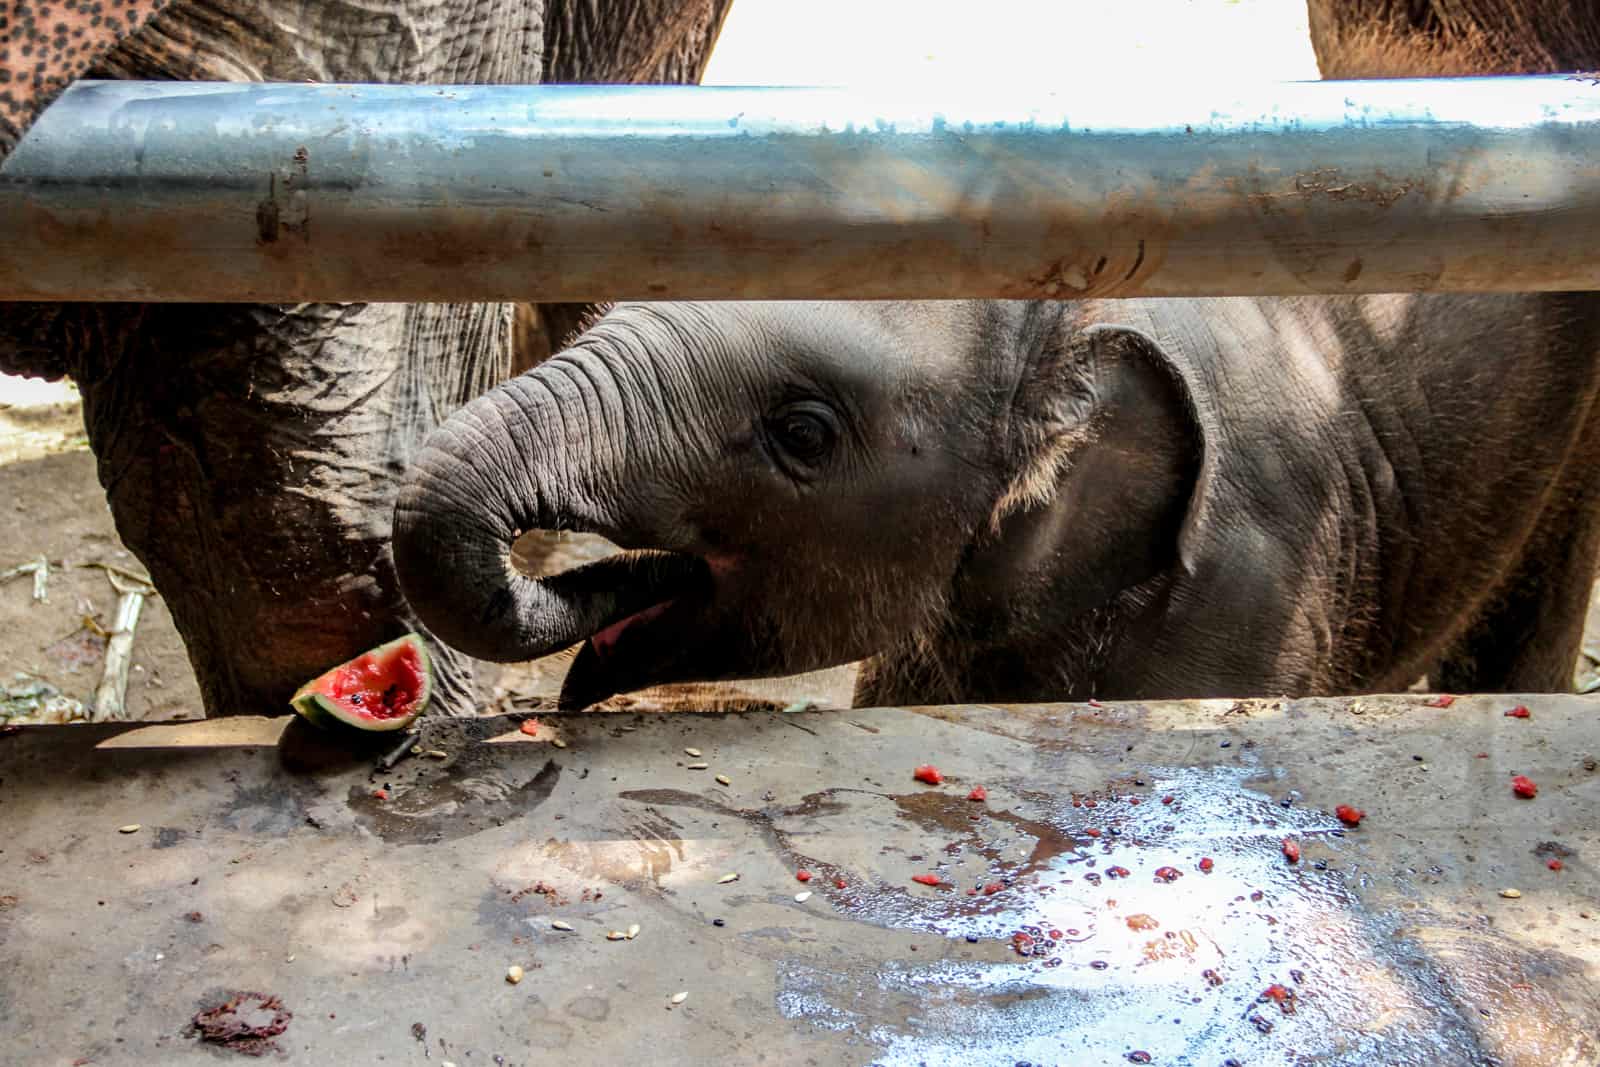 Hungry baby elephant eats a watermelon at the Elephant Nature Park in Chiang Mai, Thailand.